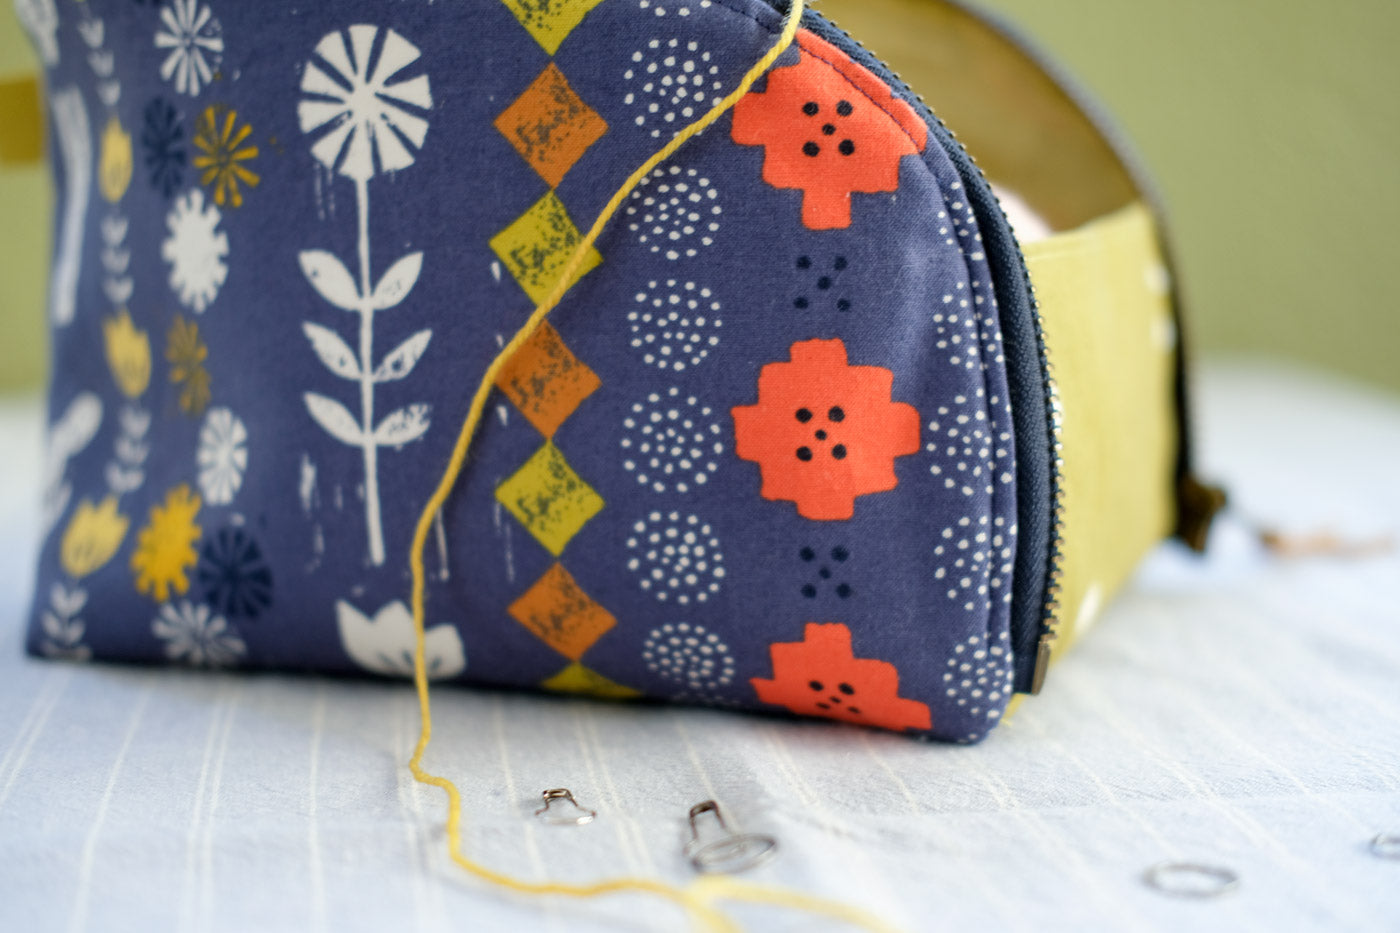 Alexia Abegg's Sunshine fabric made up in an Open-Out-Box-Pouch